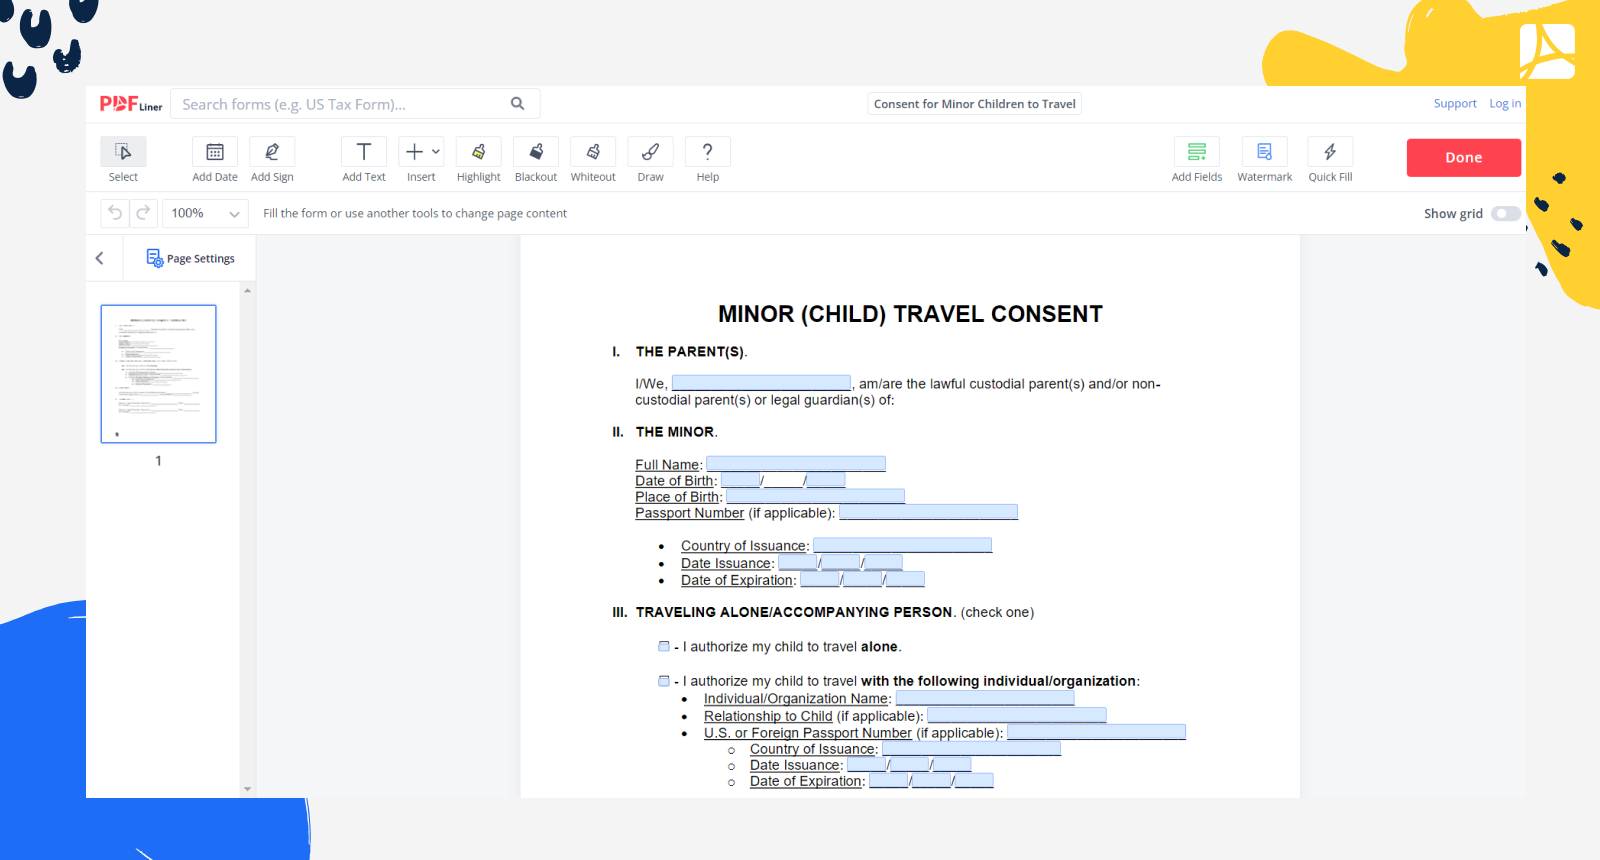 Consent for Minor Children to Travel Form Screenshot